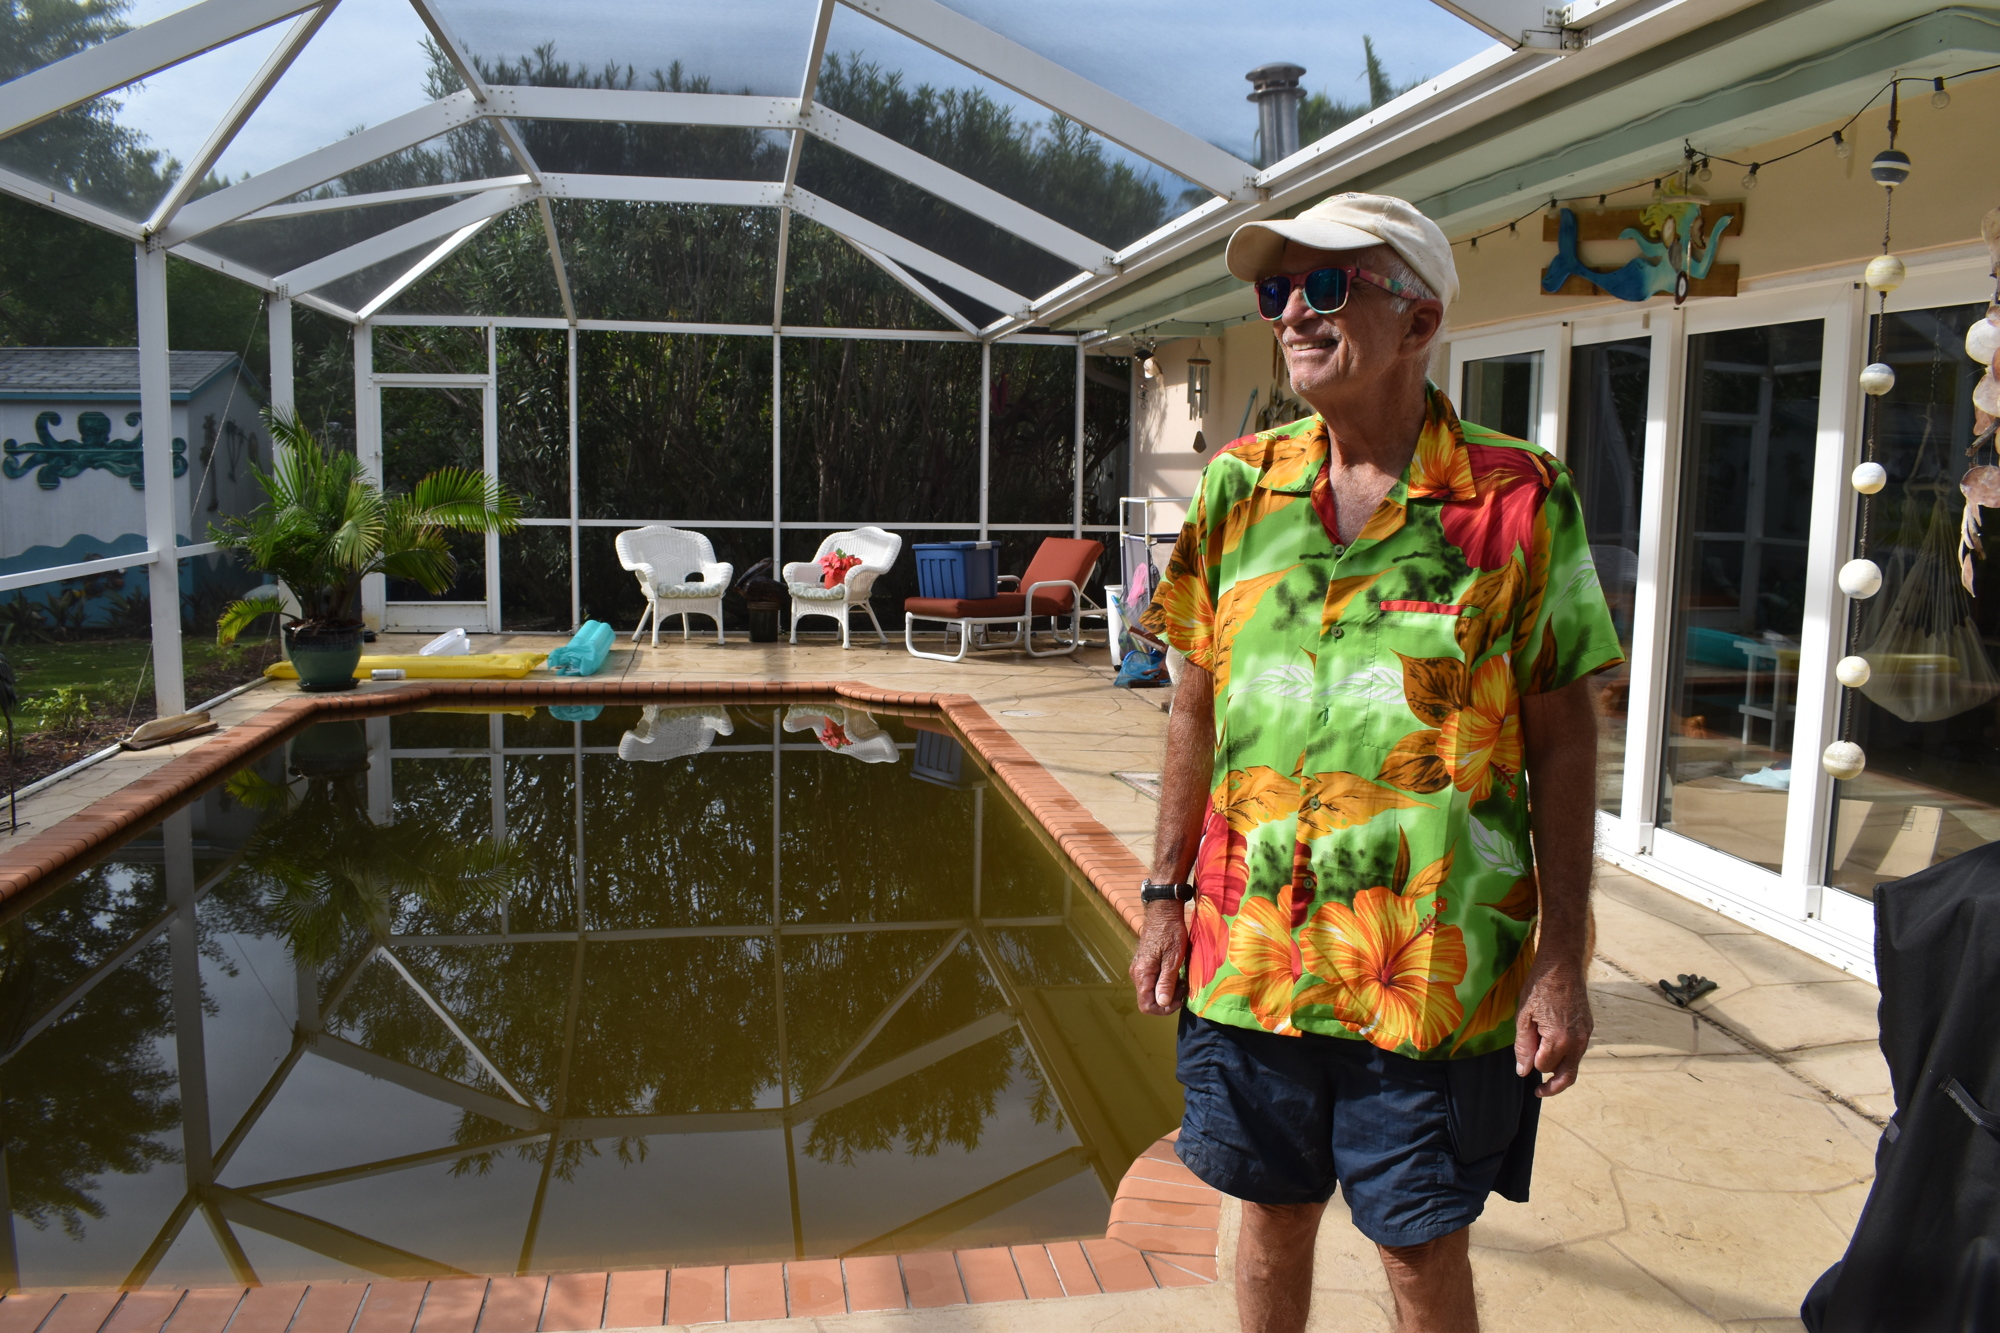 The stormwater from Eta caused Fred Kagi's pool to overflow. The water flooded Kagi's home.